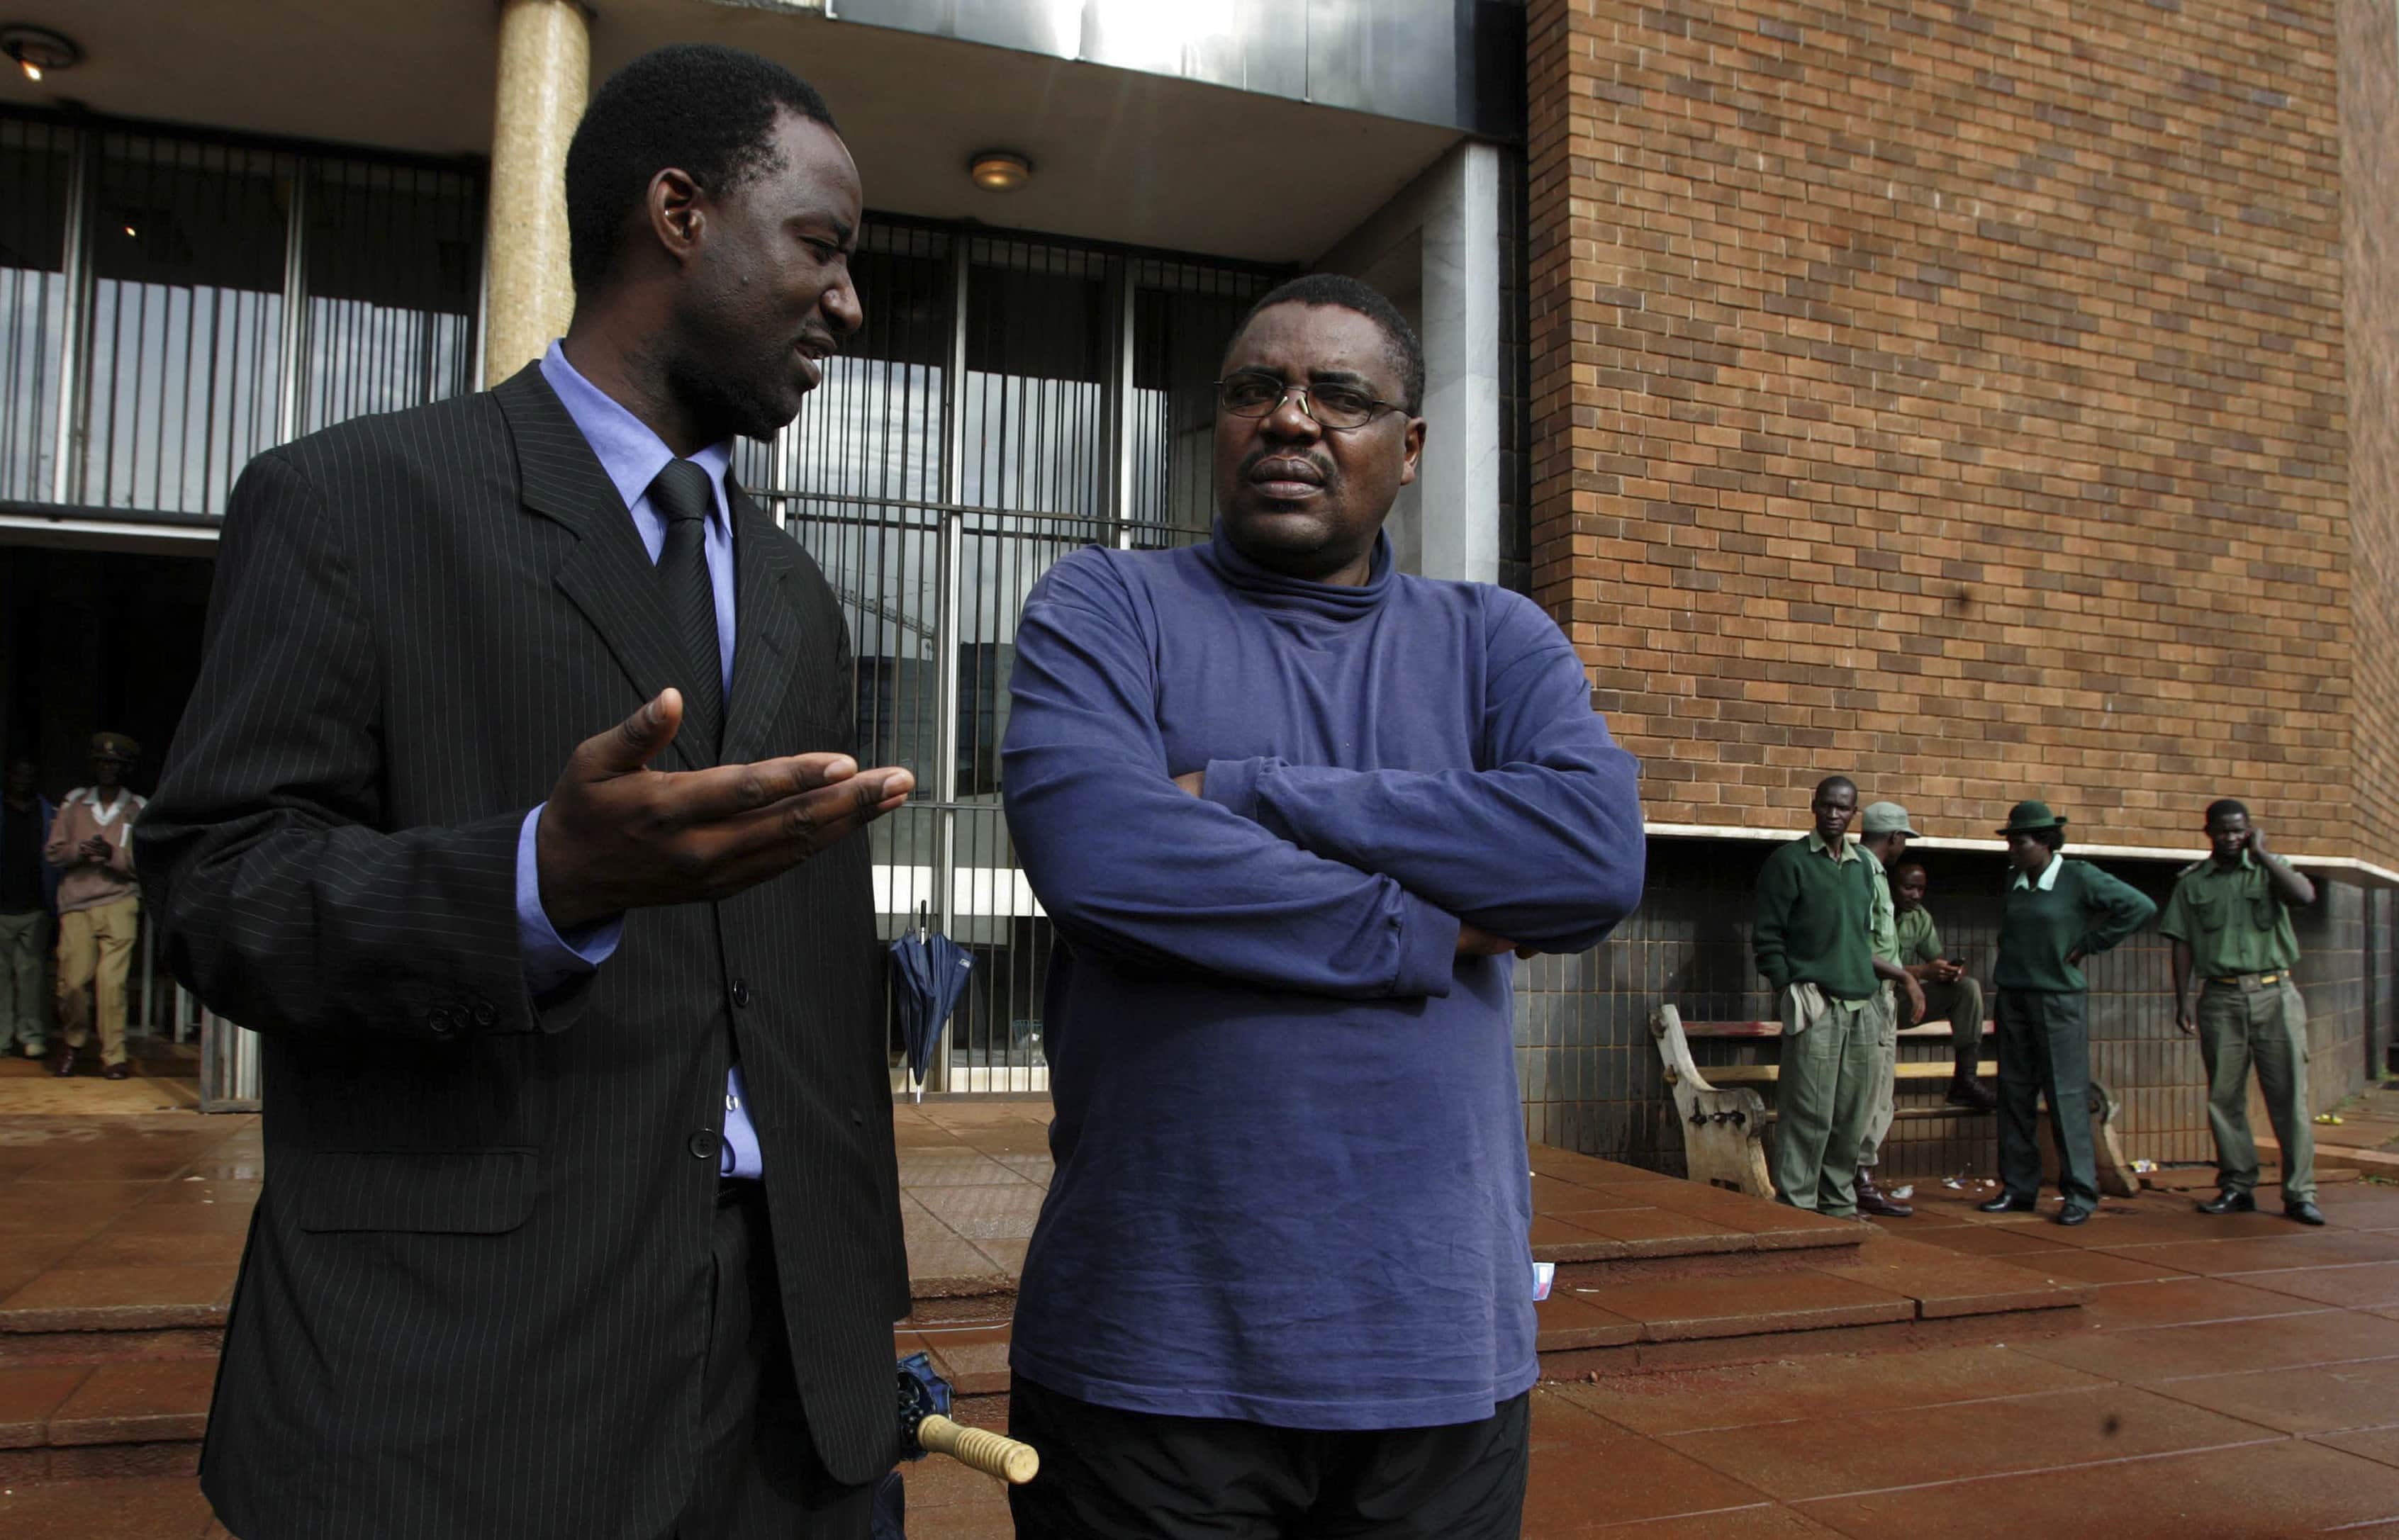 Nevanji Madanhire (C), editor of The Zimbabwe Standard Newspaper, talks to his lawyer Chris Mhike (L) as they leave the Harare Magistrates Court, 1 December 2010, REUTERS/Philimon Bulawayo